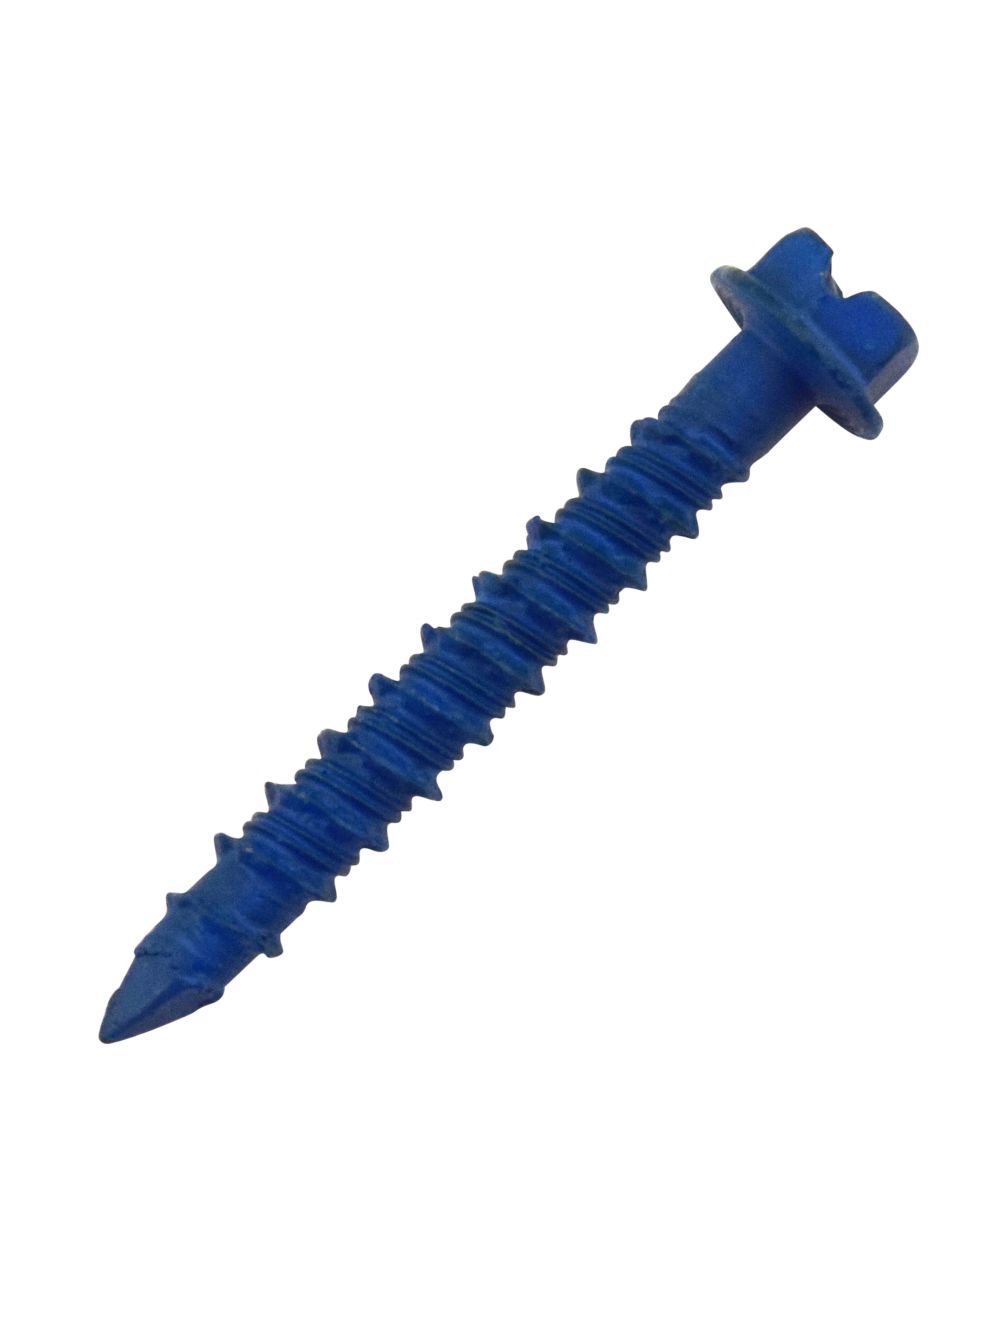 Bag Of 100 1//4” X 2-1//4” Inch Long Slotted Hex Washer Head Masonry Screw Blue